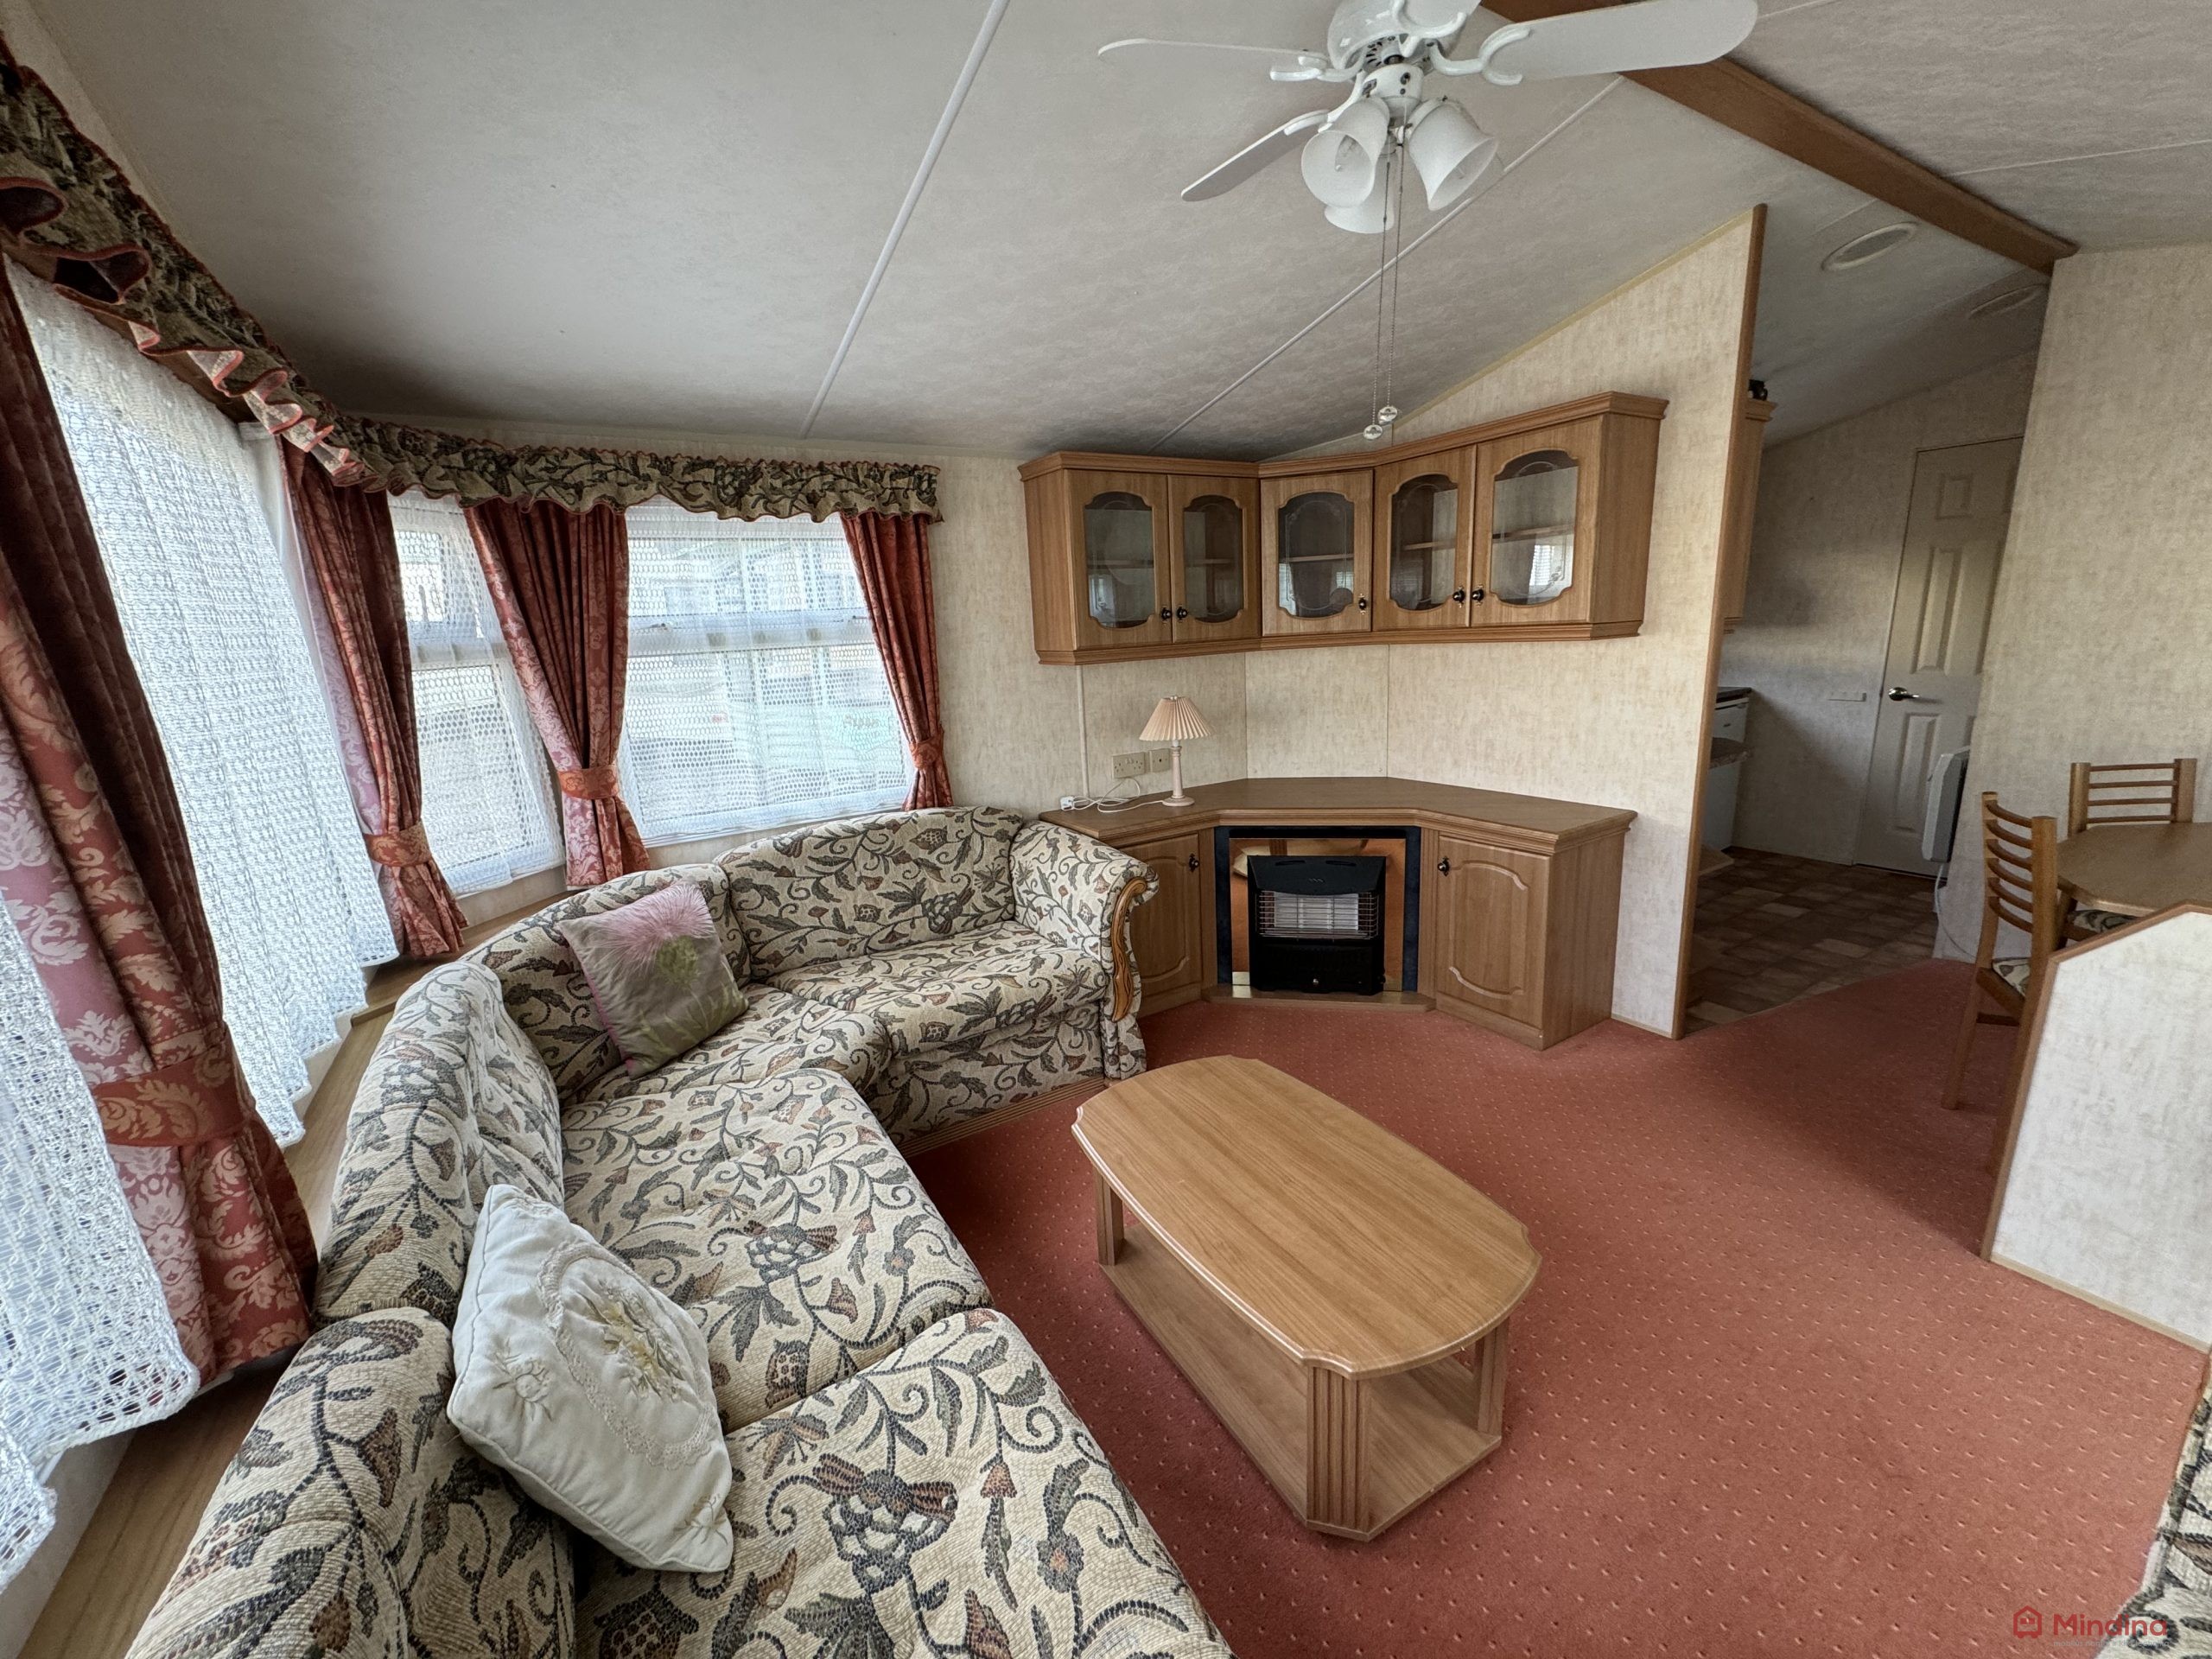 Willerby Countrystyle 3,7×11